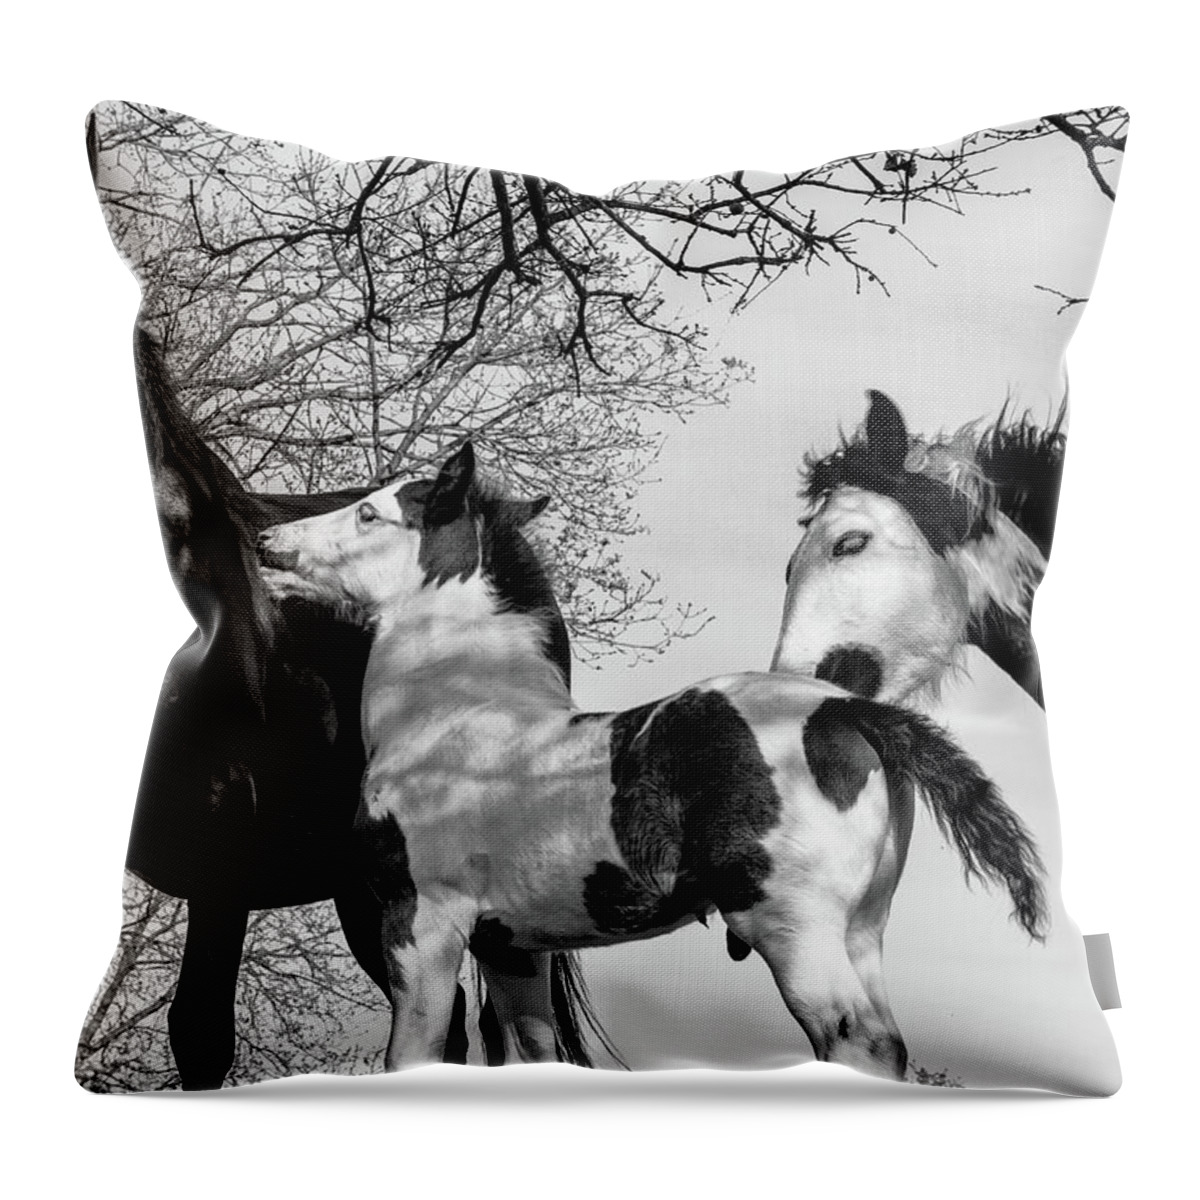 Adorable Throw Pillow featuring the photograph Horse Family - BnW by Umberto Barone